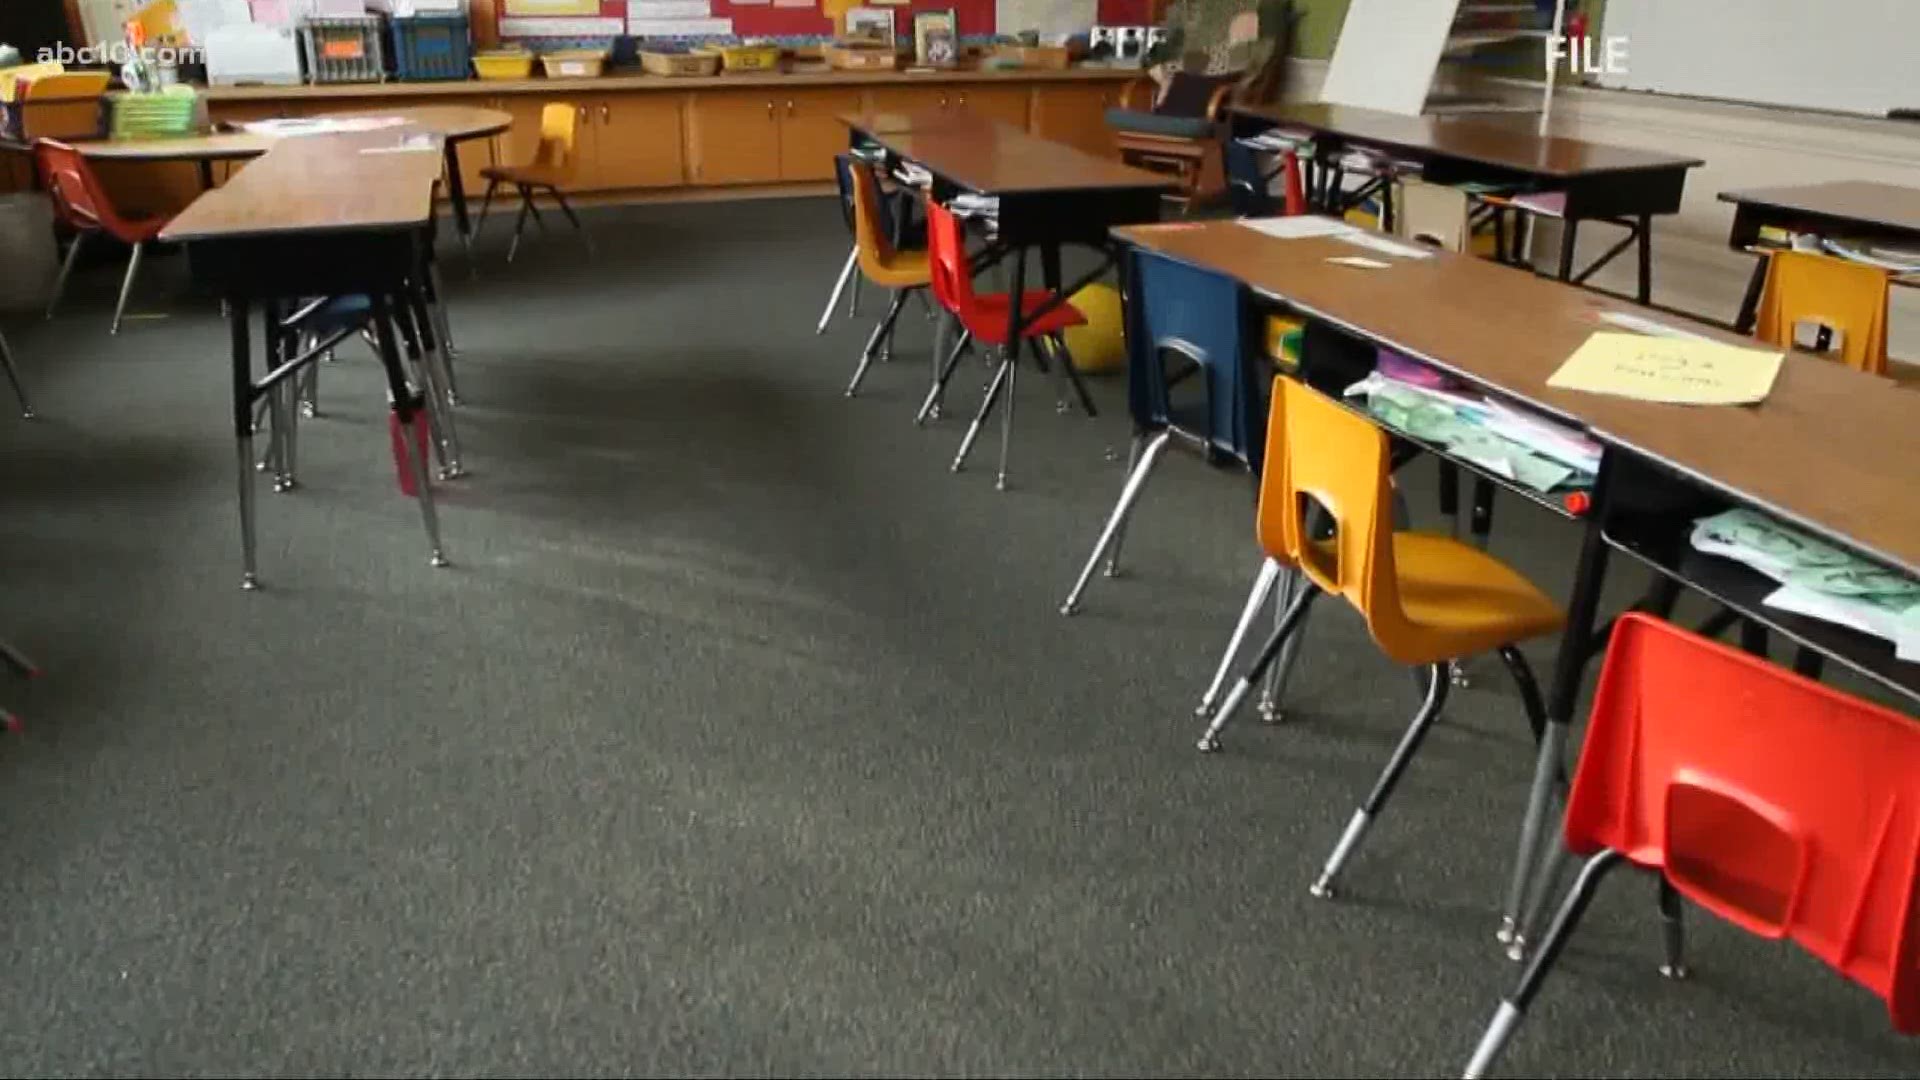 Washington Unified School District teachers called in during the board meeting to express their frustration of schools potentially reopening amid the pandemic.